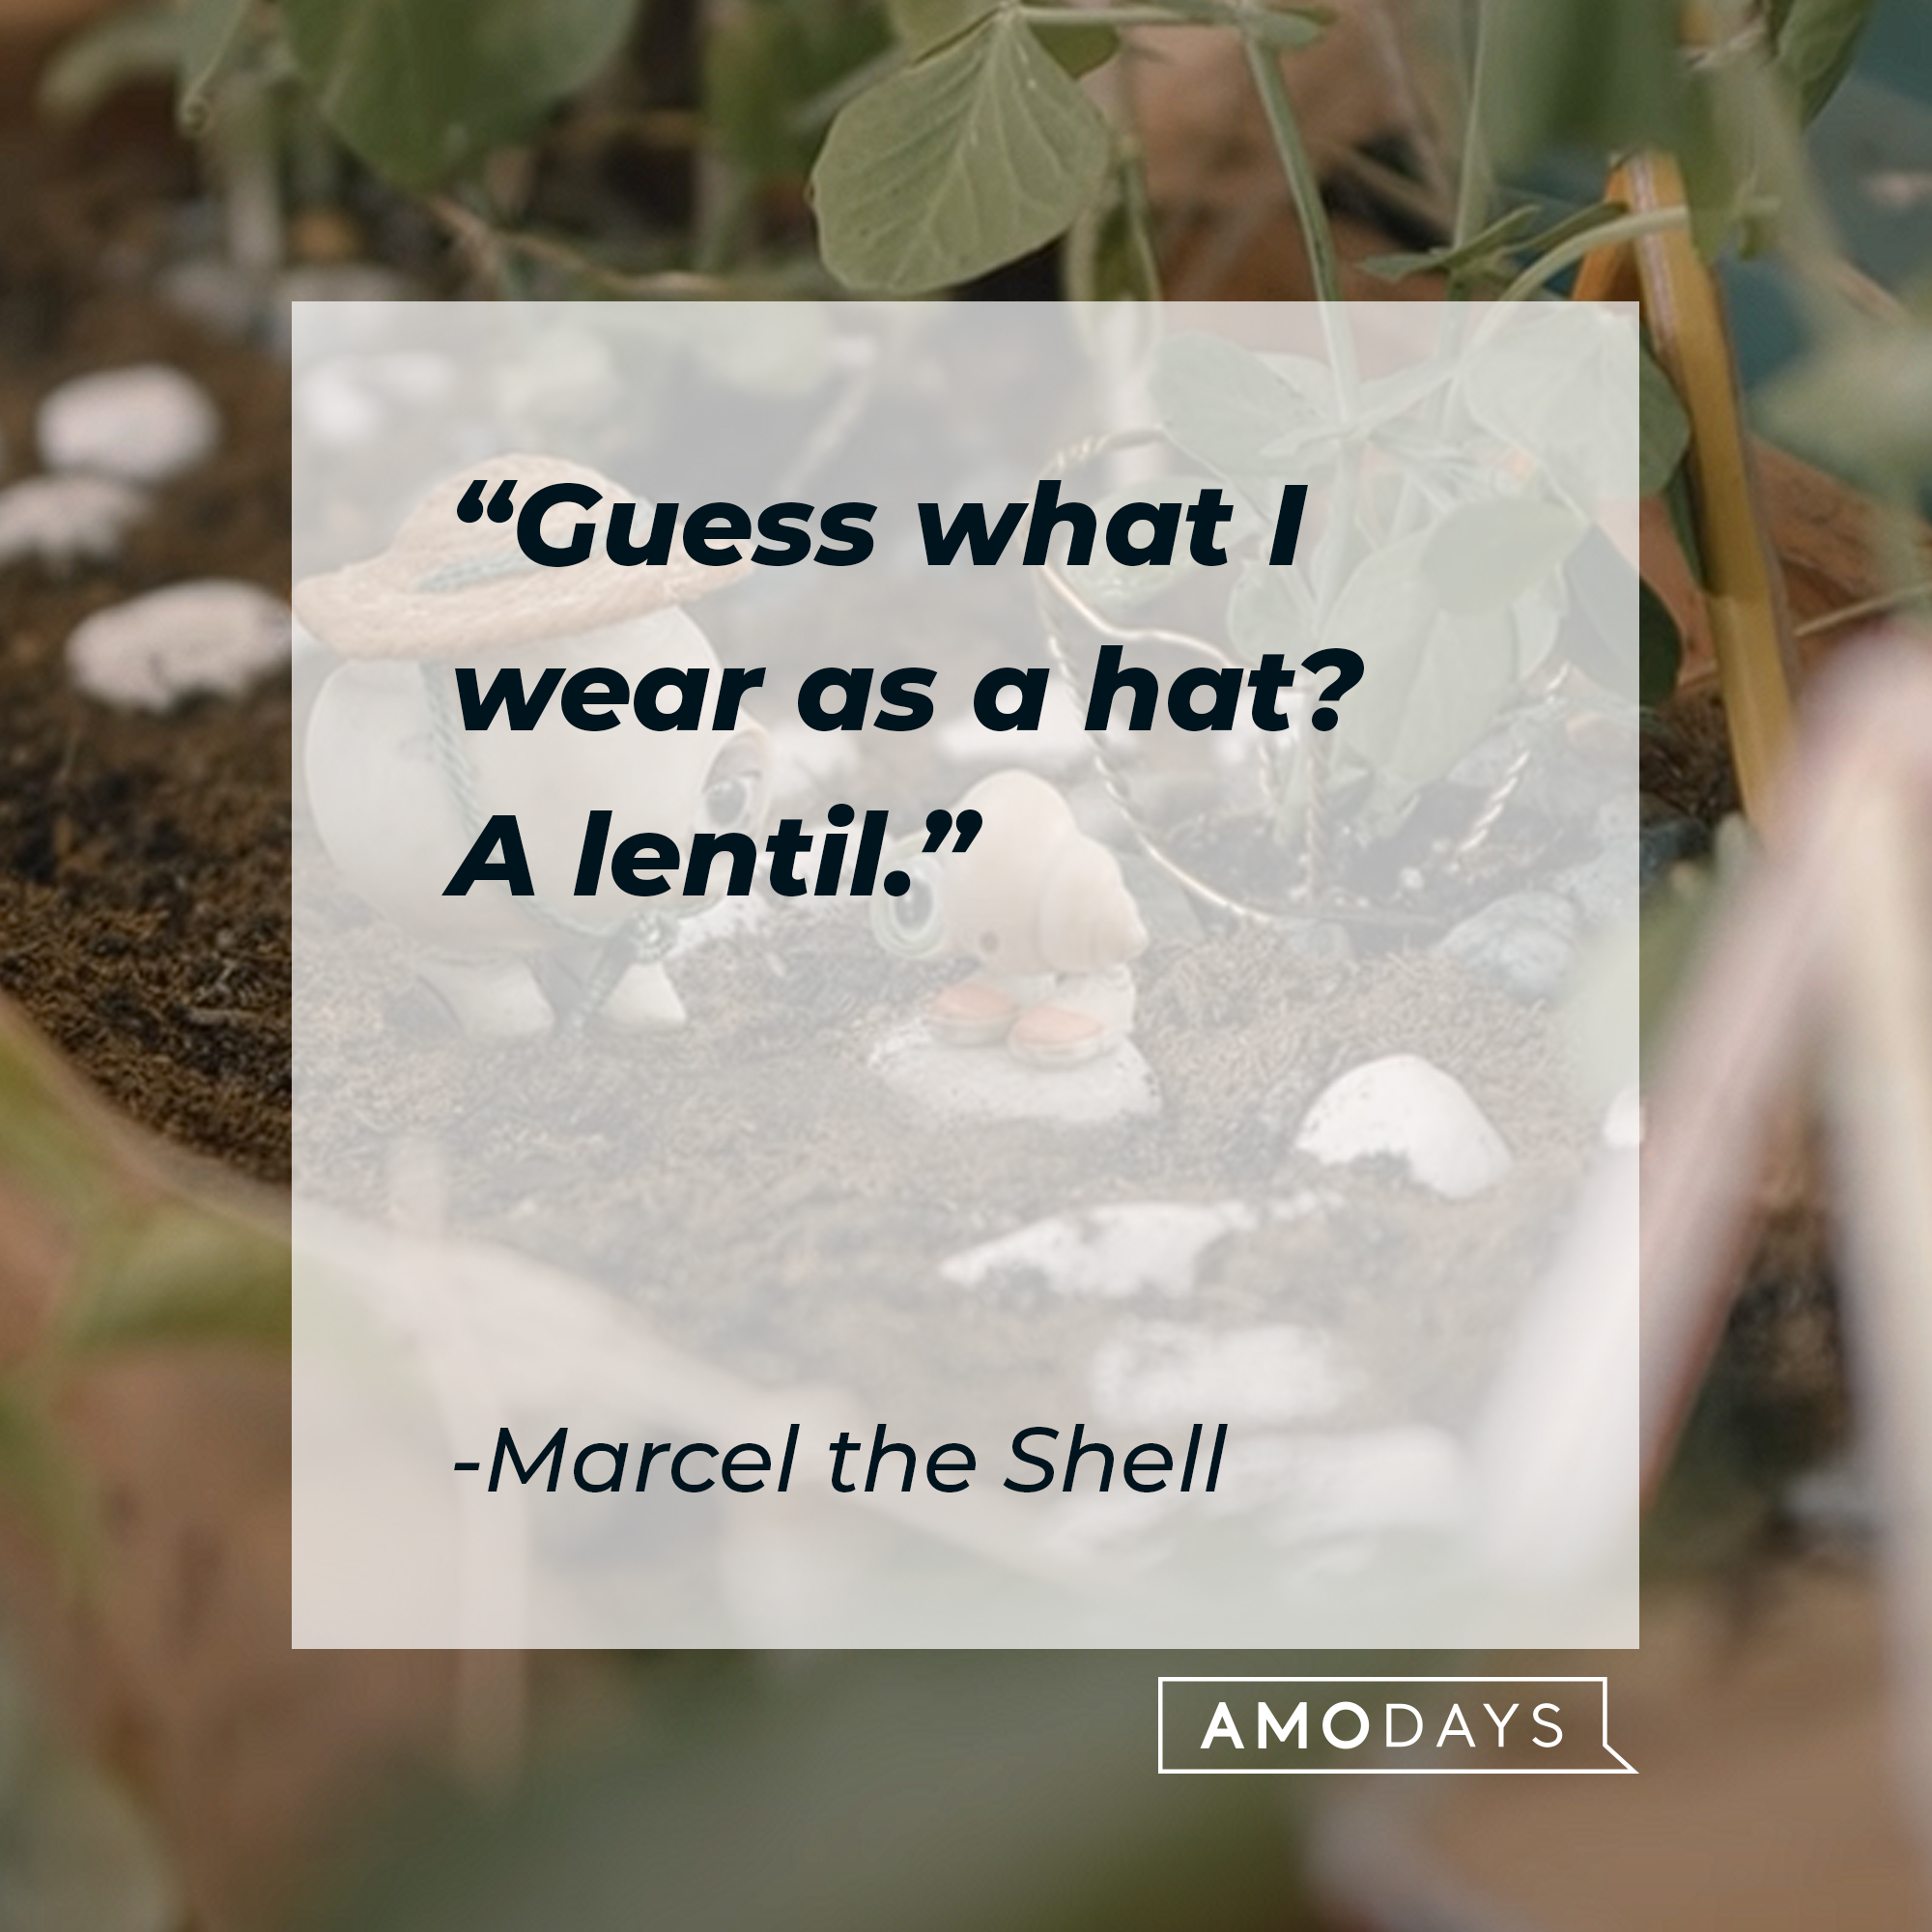 Marcel the Shell's quote: "Guess what I wear as a hat? A lentil." | Source: youtube.com/A24